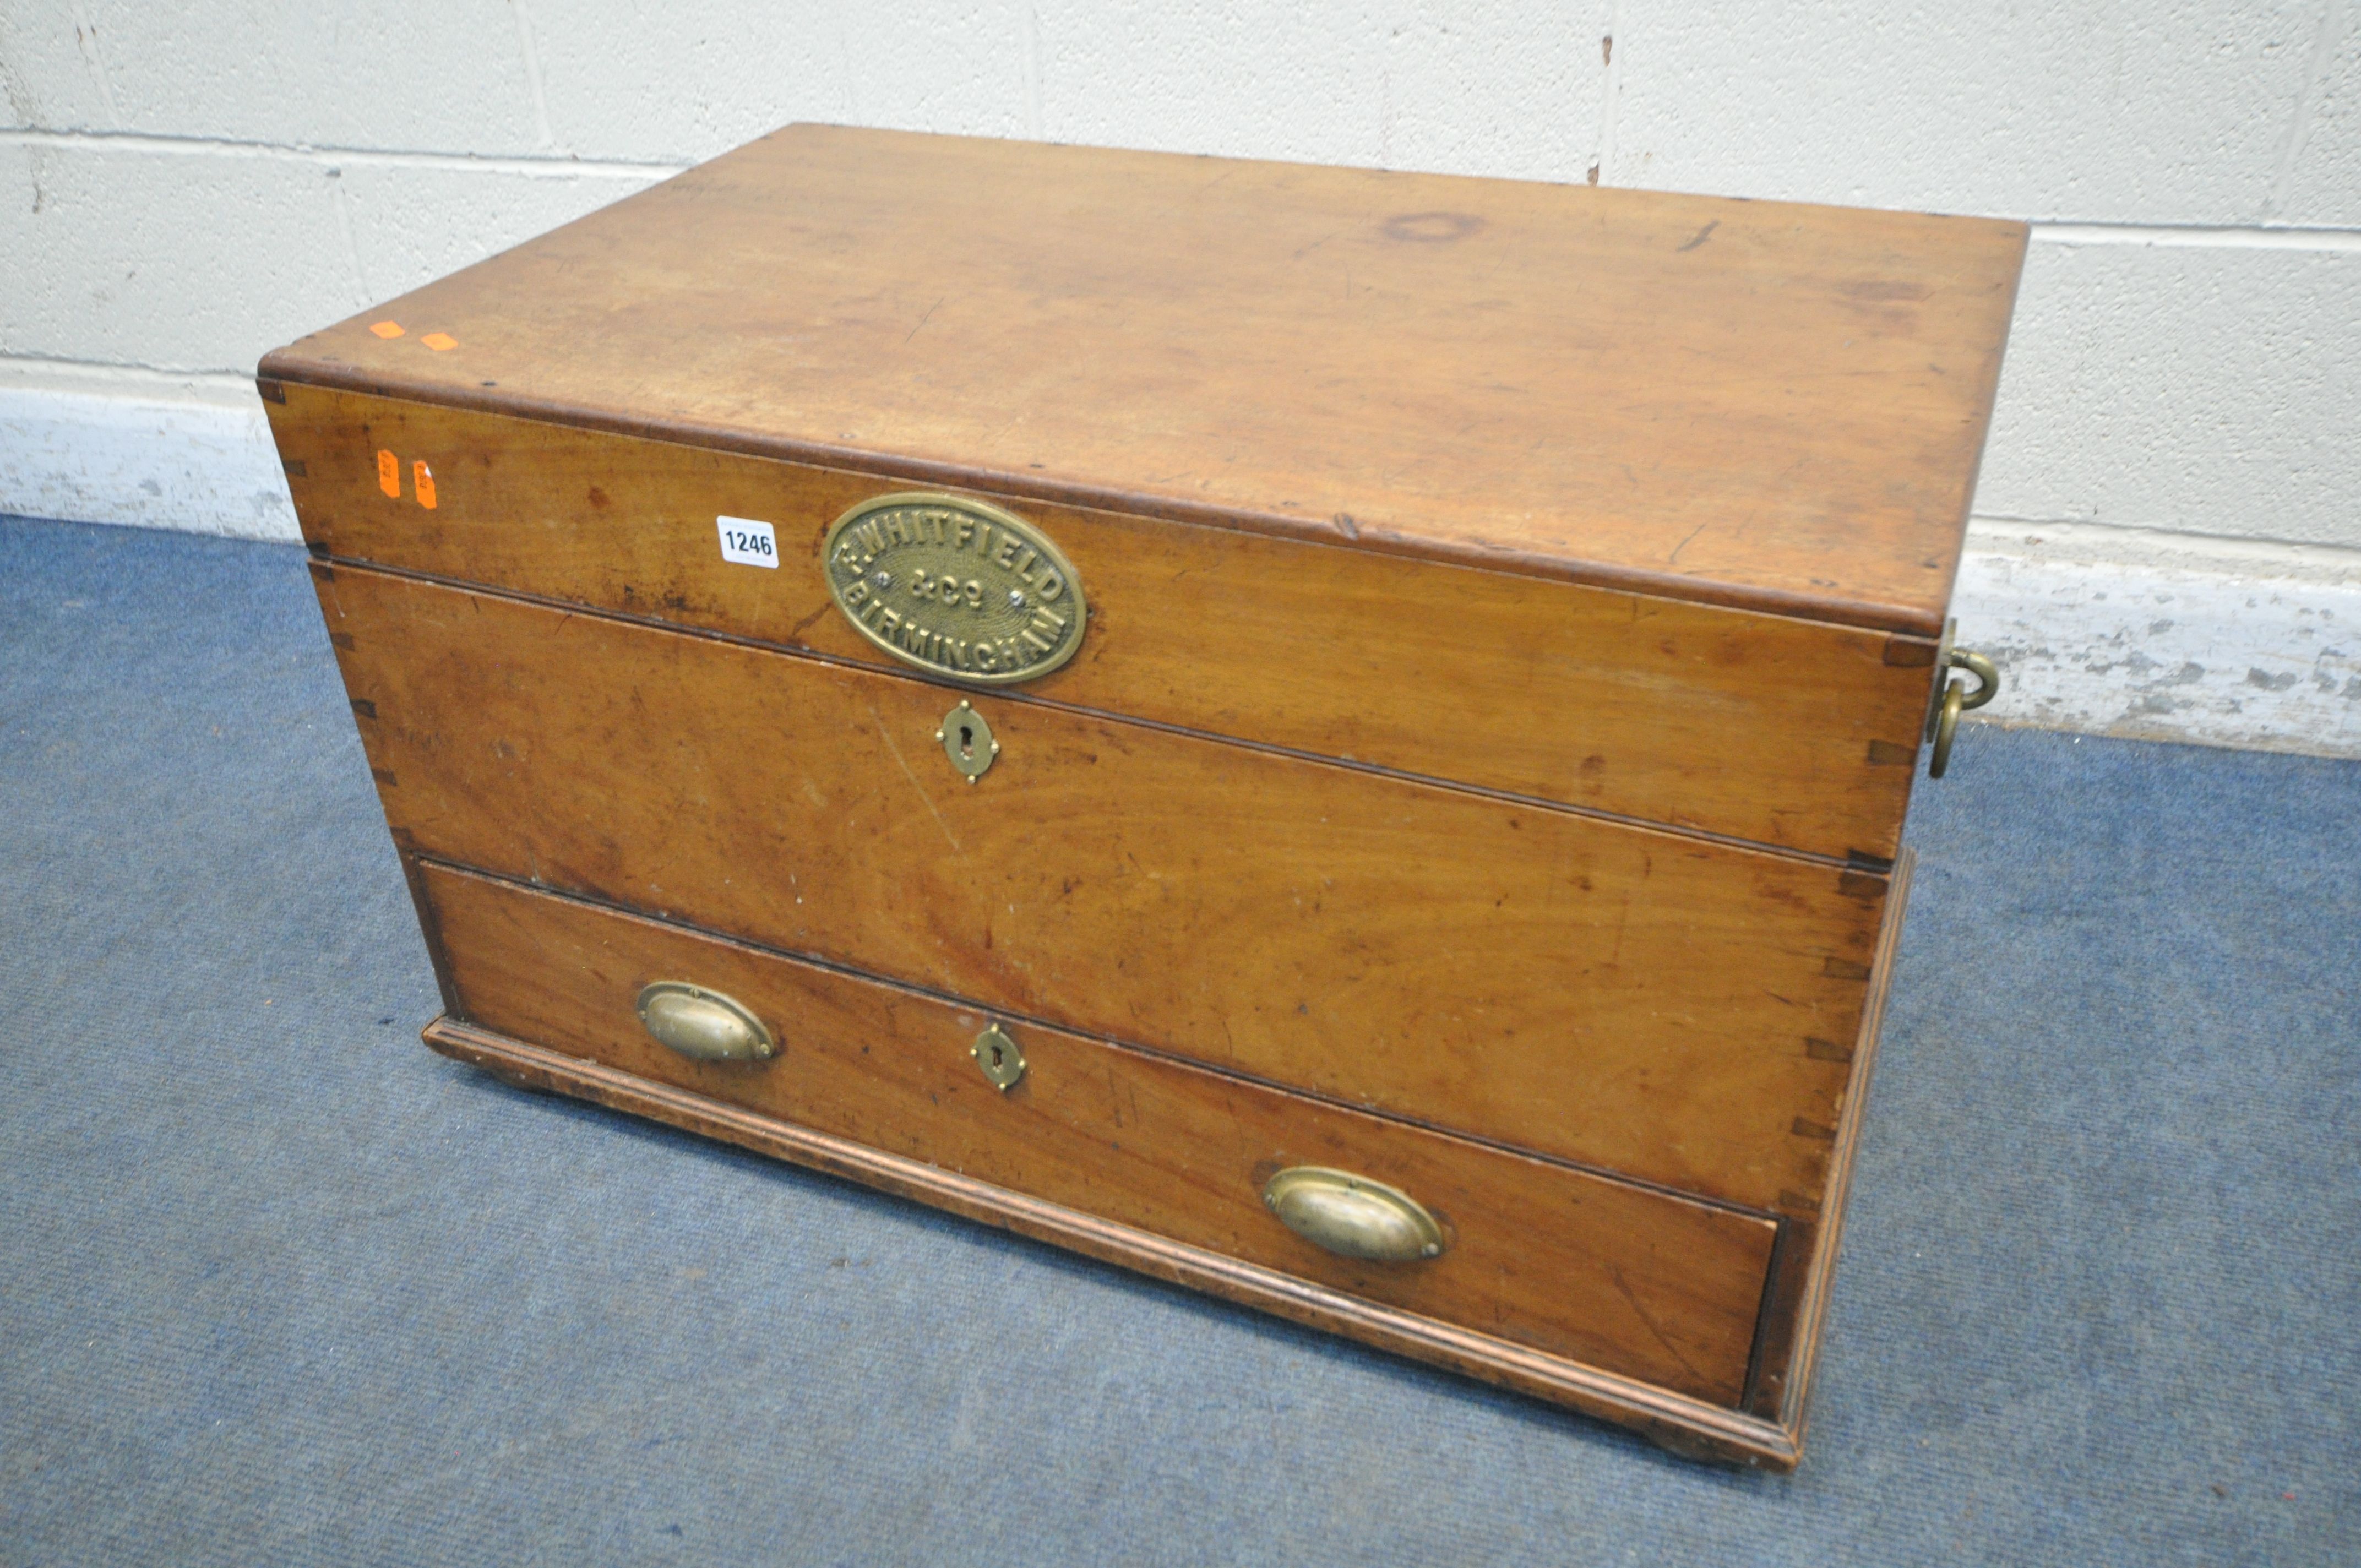 A LATE 19TH CENTURY WALNUT BLANKET CHEST, bearing a brass label reading Whitfield & Co,